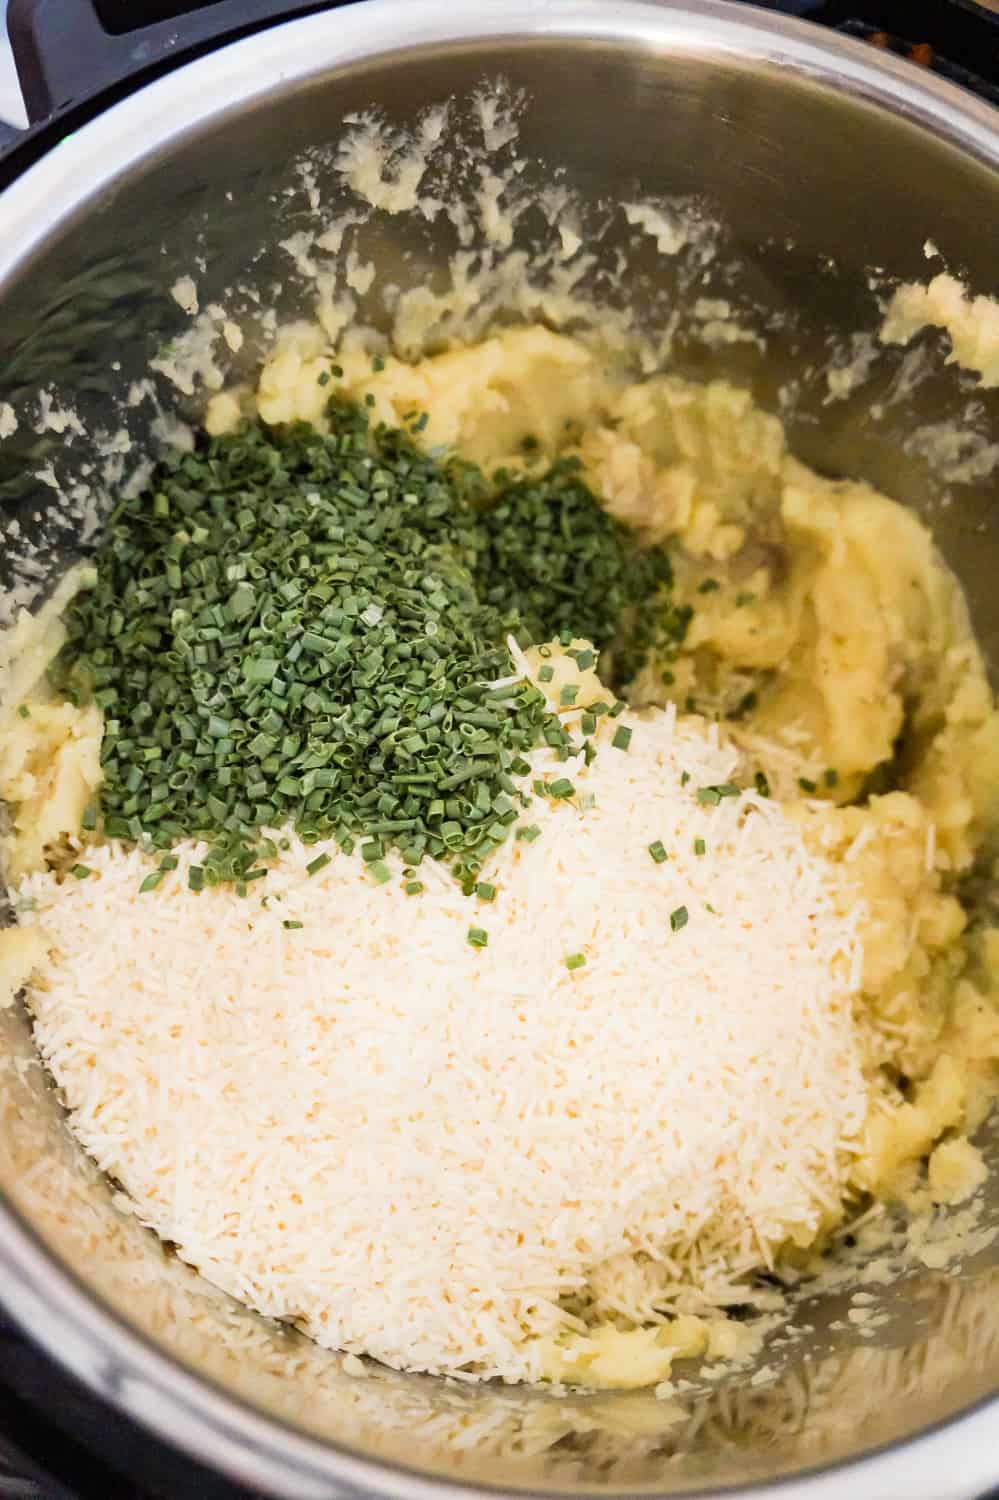 grated Parmesan cheese and chopped chives on top of mashed potatoes in an Instant Pot